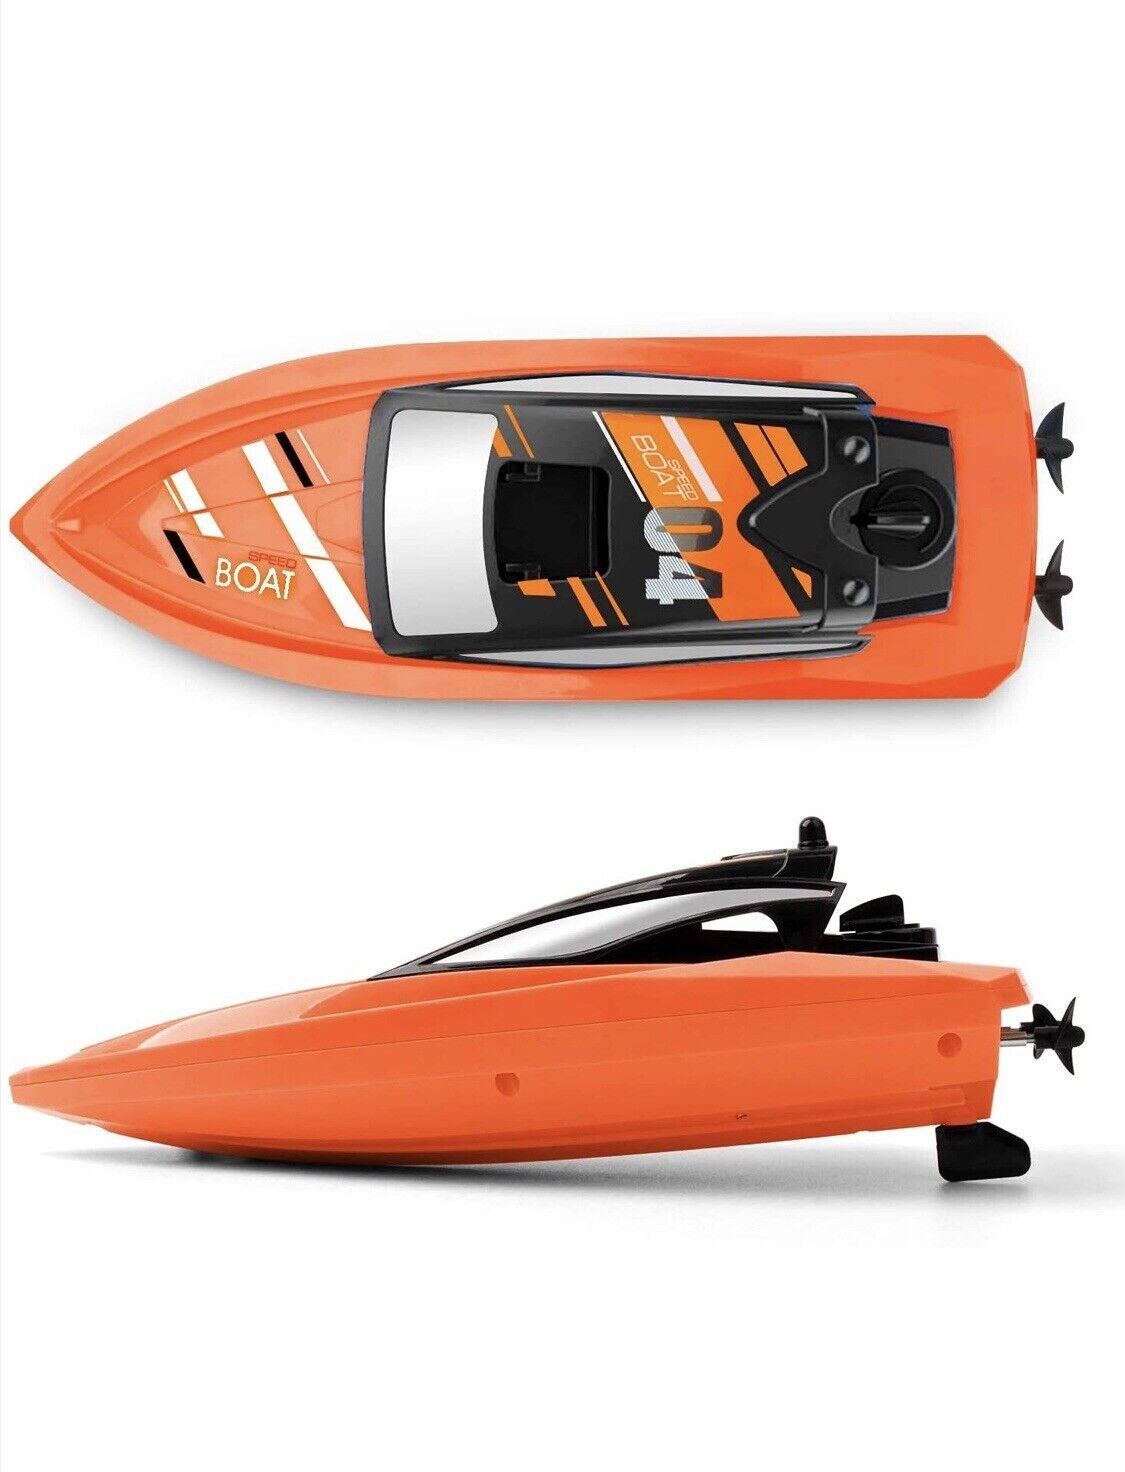 Gizmo Rc Boat: Upgrade Your Boating Experience with Gizmo RC Boat and Accessories